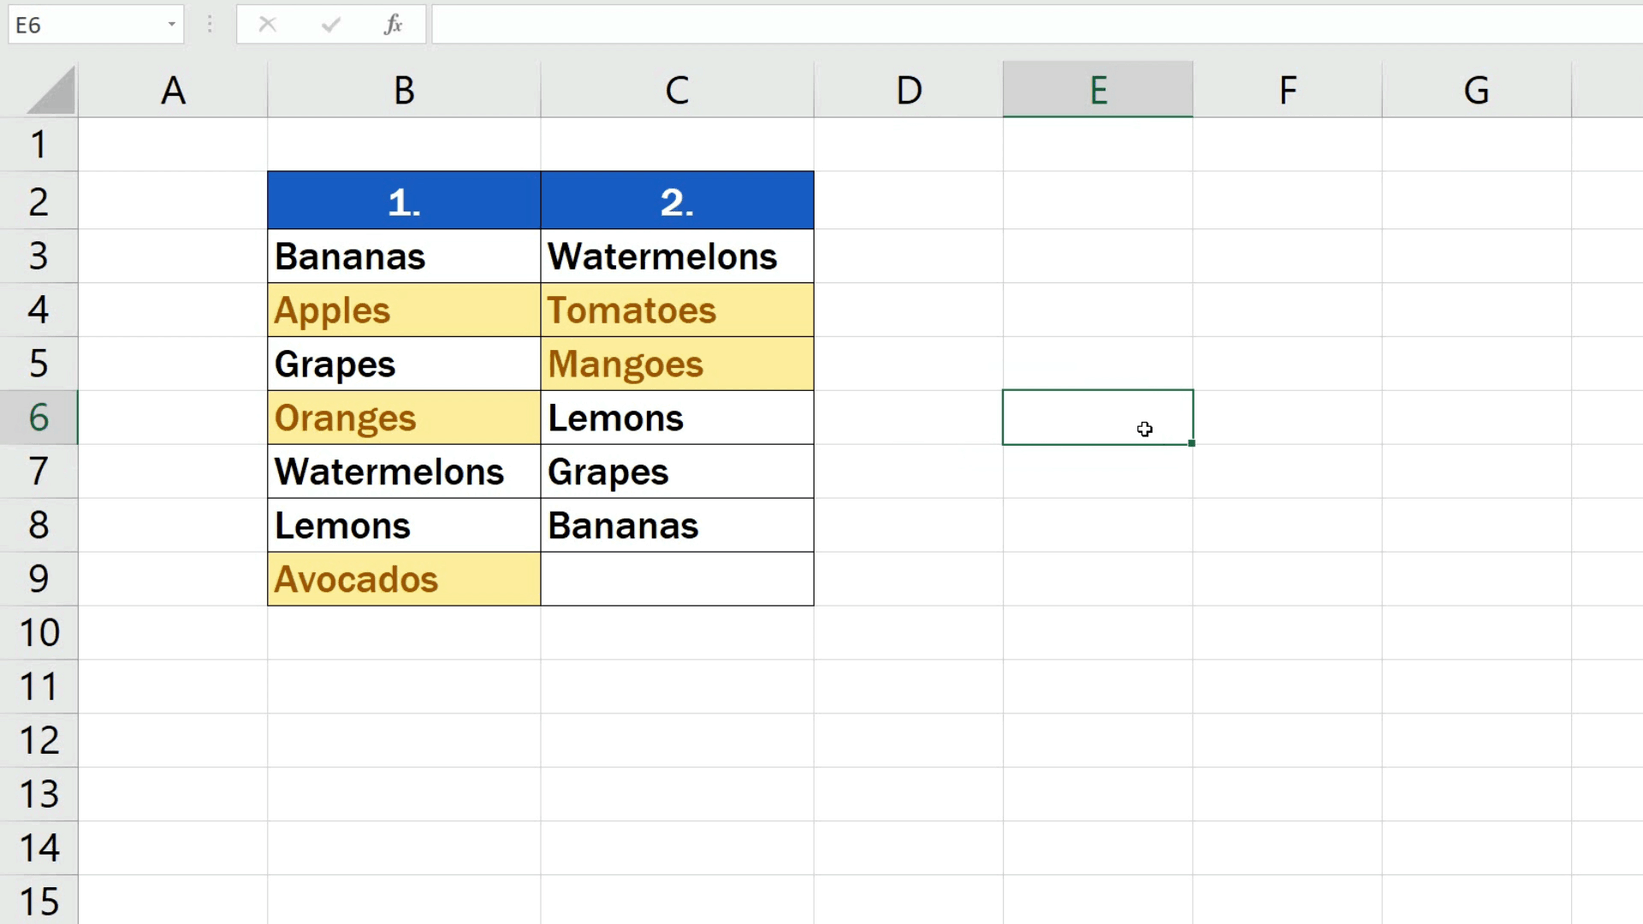 how to find difference between two column values in excel